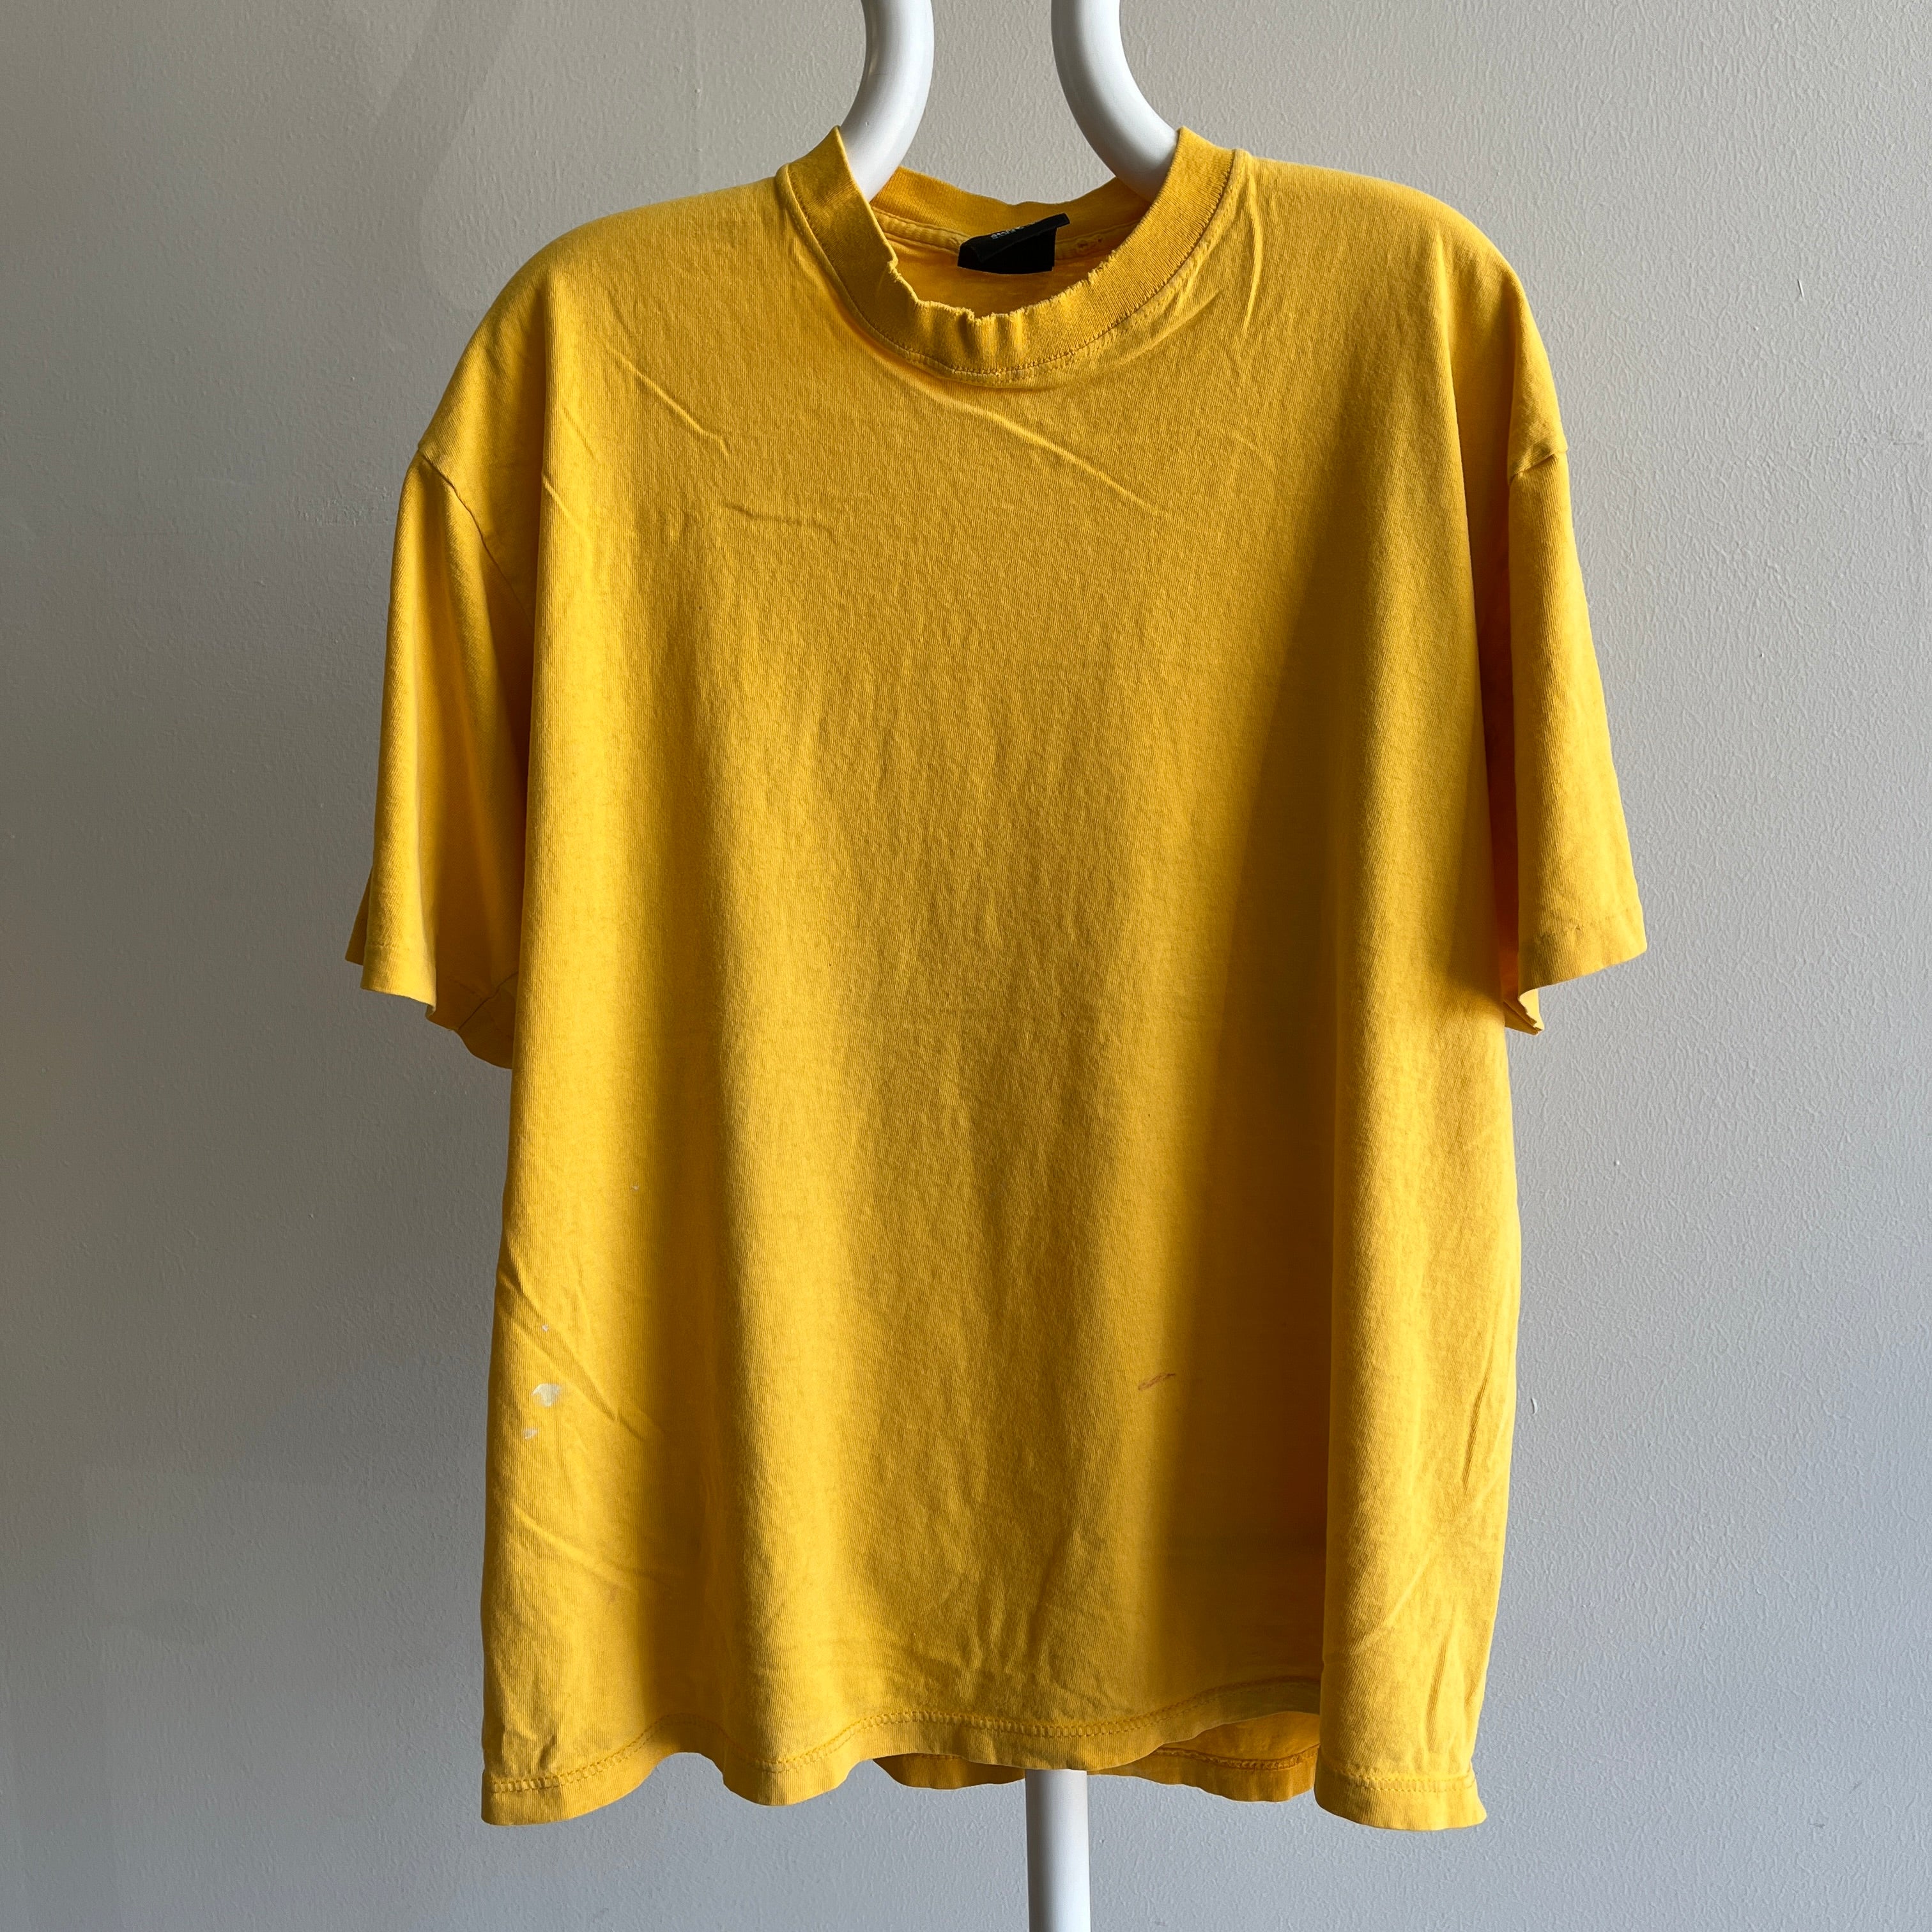 1990s Super Soft and Worn Marigold Yellow Cotton T-Shirt by Soffe